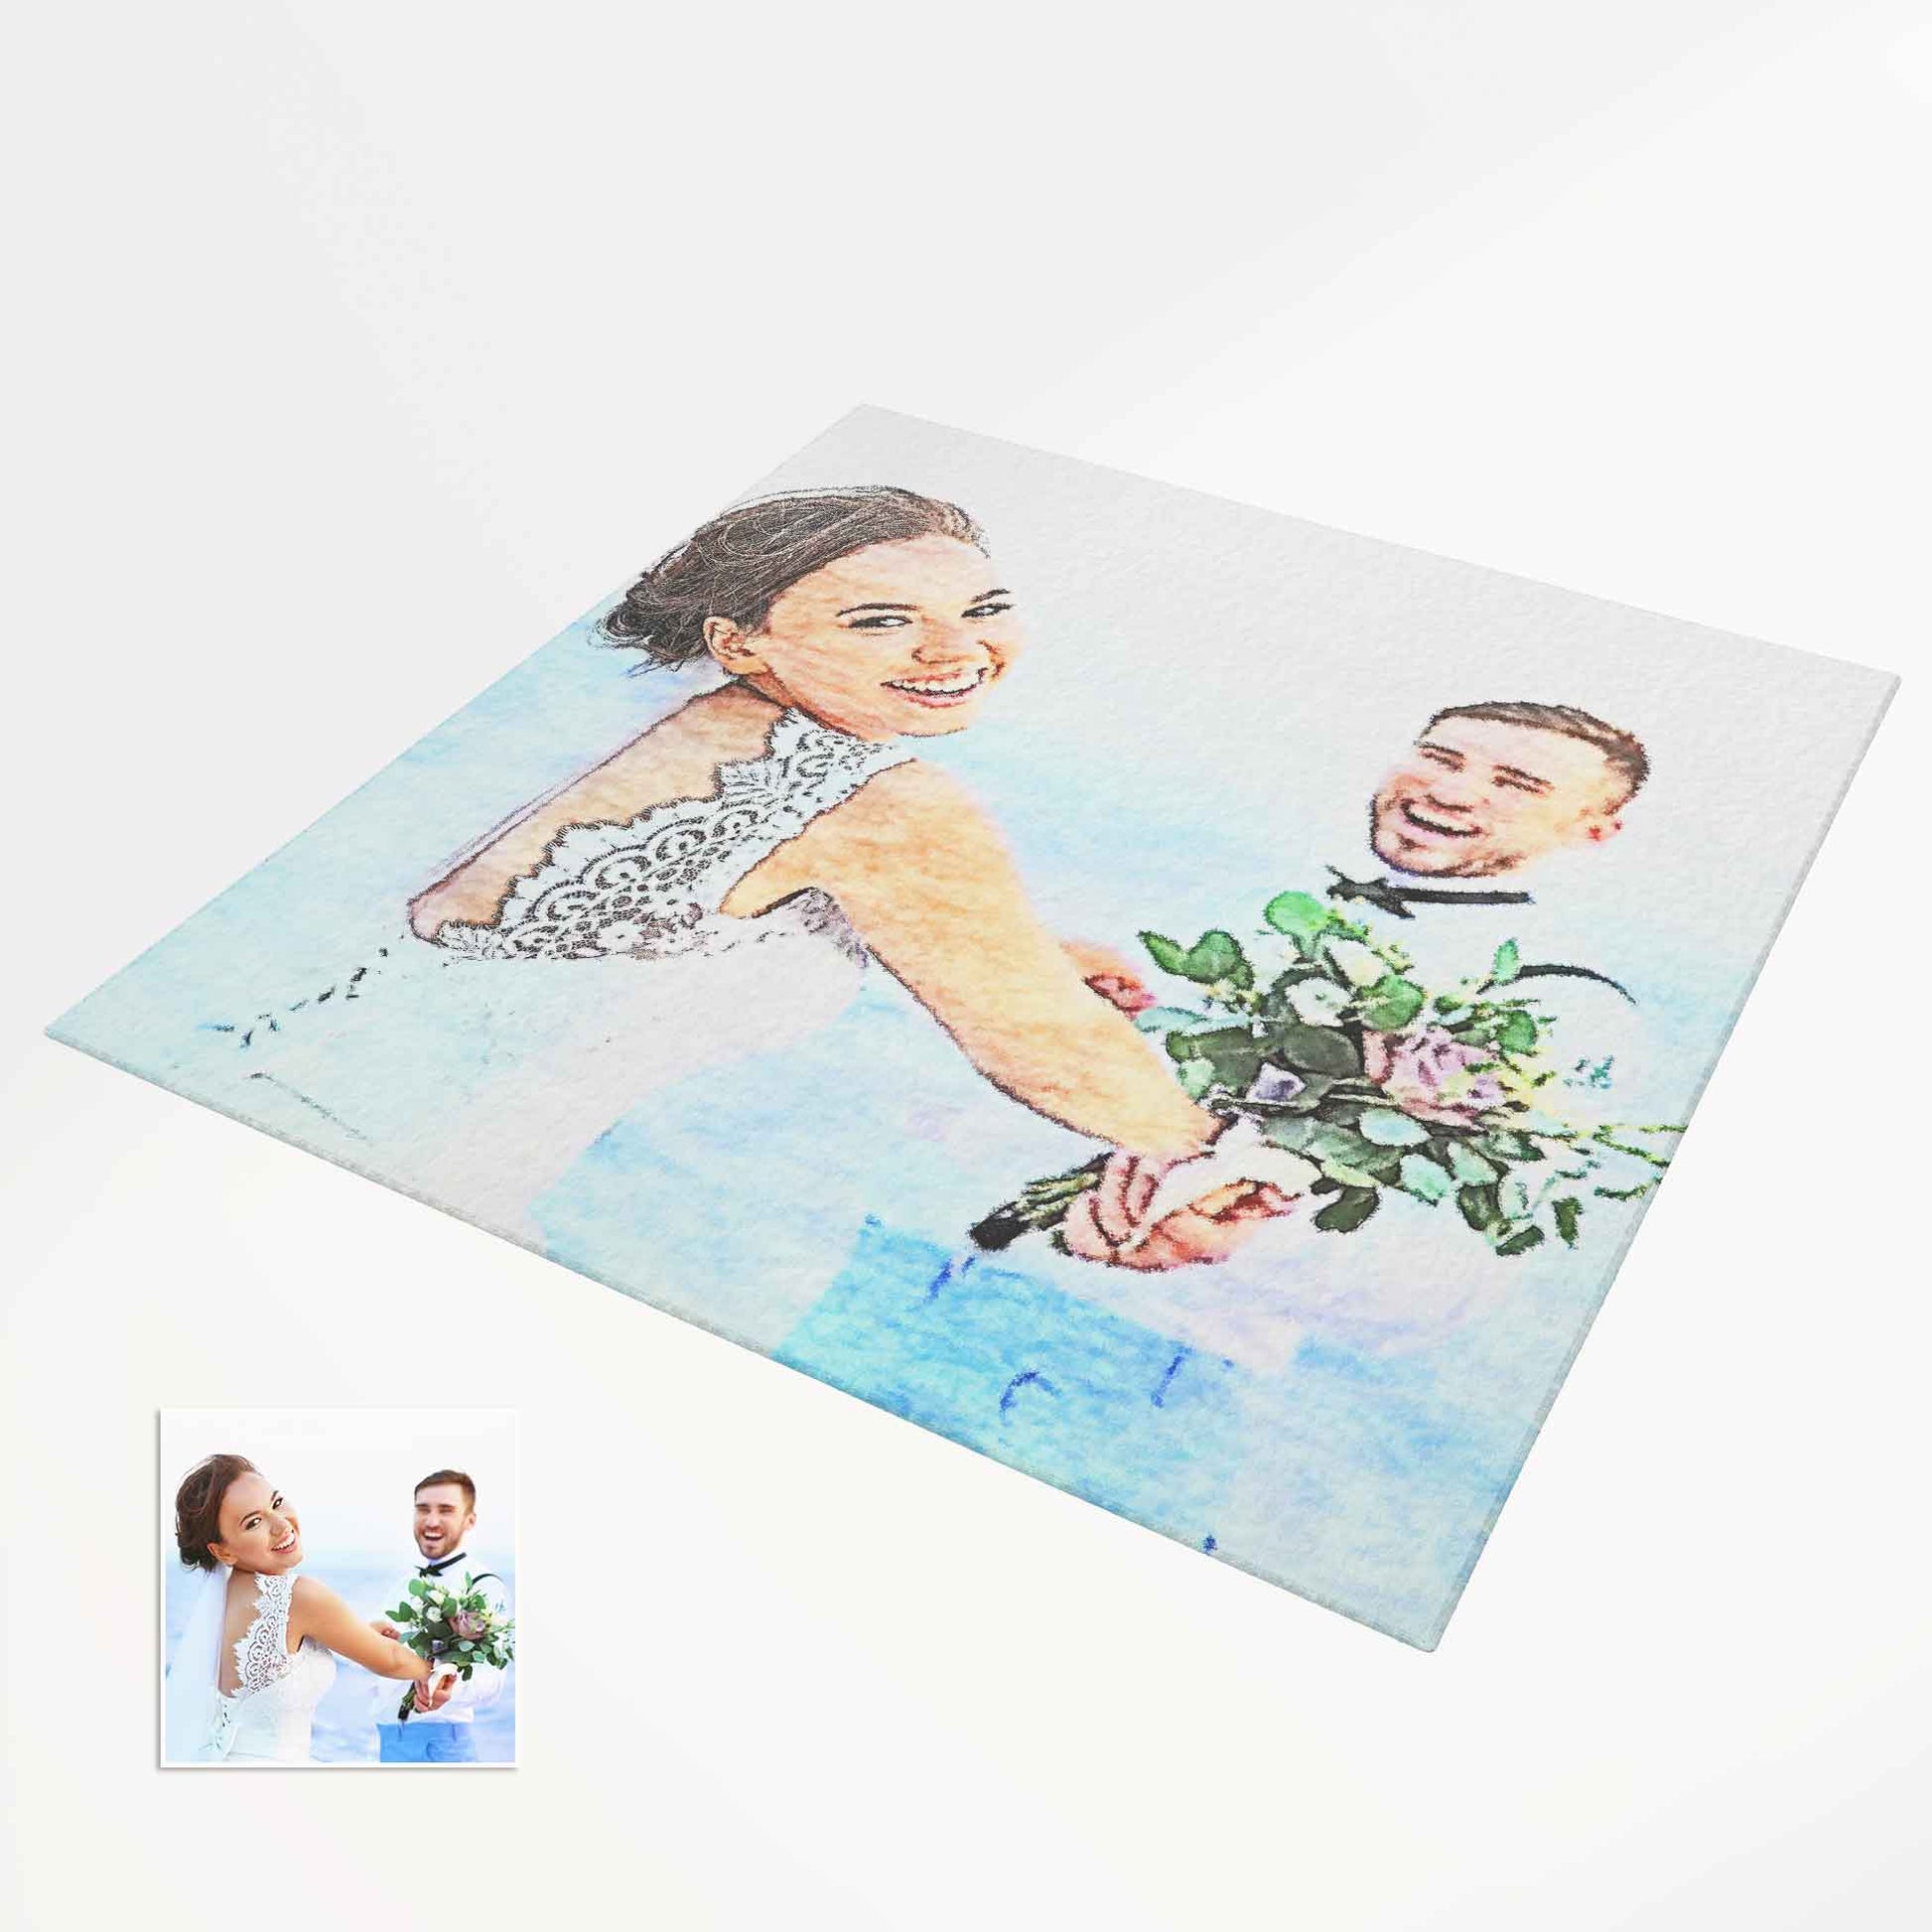 Add a touch of sophistication to your space with our Personalised Watercolour Photo Rug collection. Turn your memories into stunning works of art